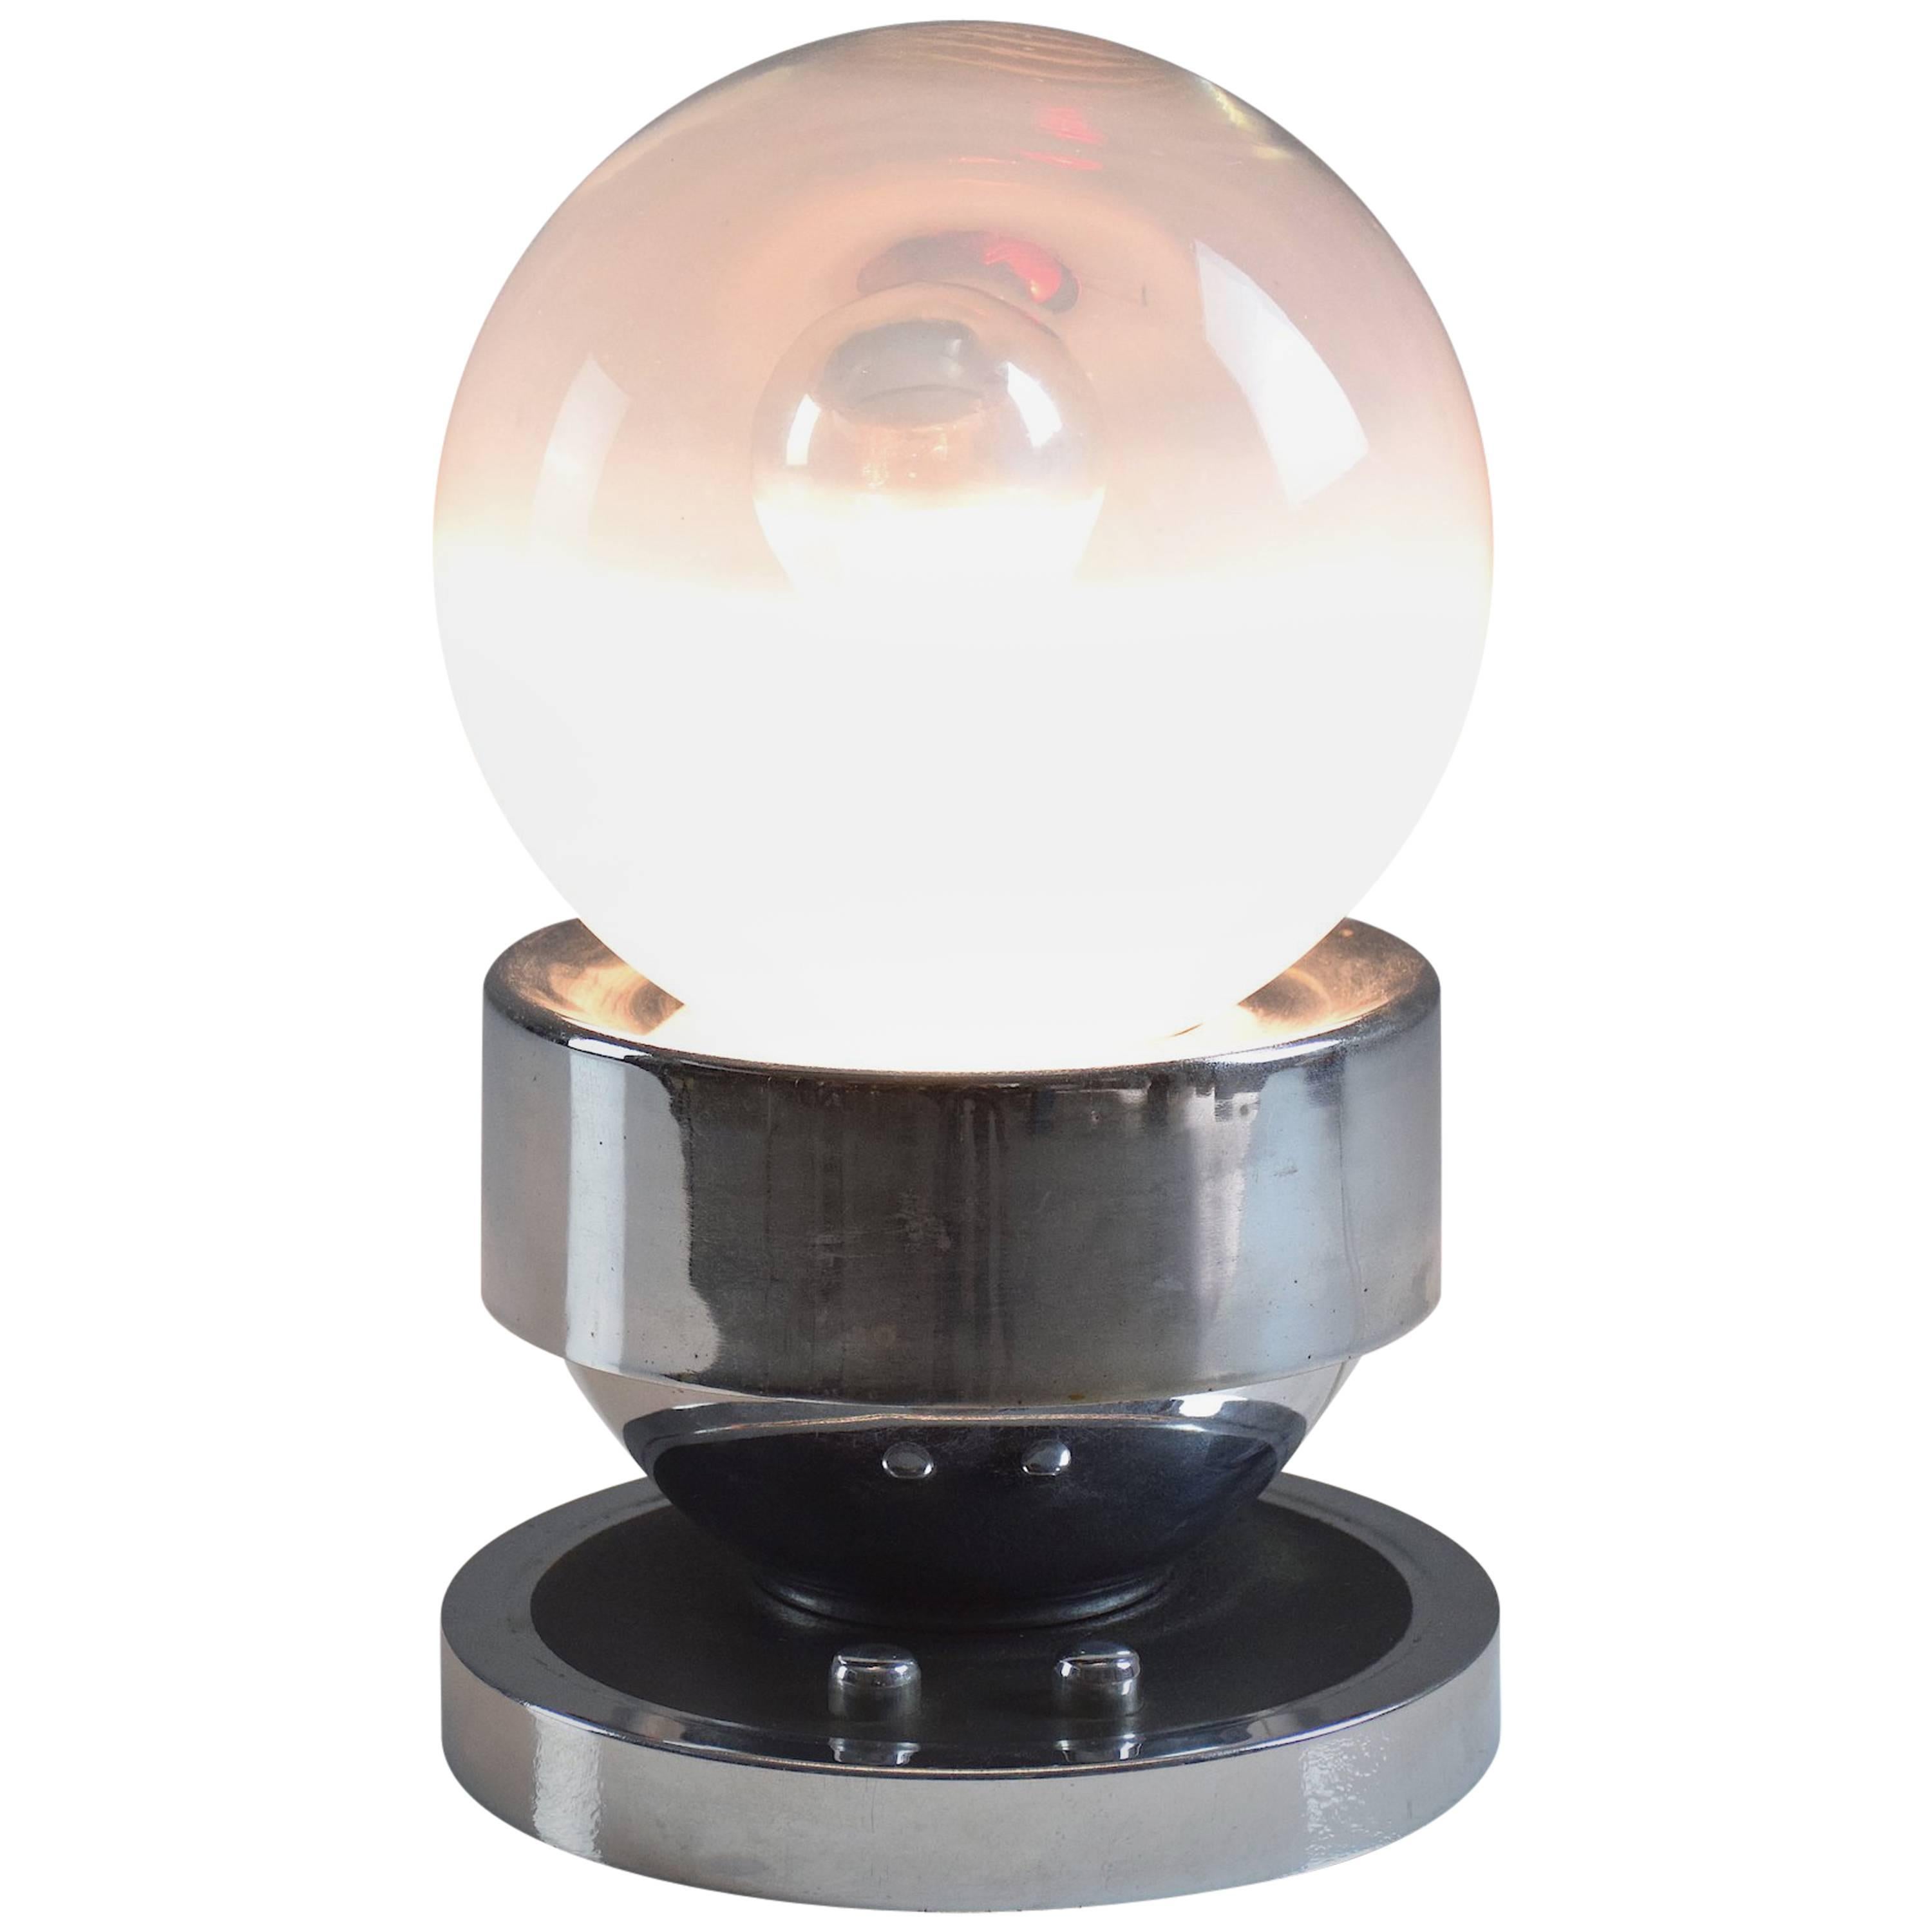 20th century vintage ball lamp composed of a chrome layered structure and a glass spherical shade. An original design with two-light push switches: one controls a white light and the other controls a red light.

 